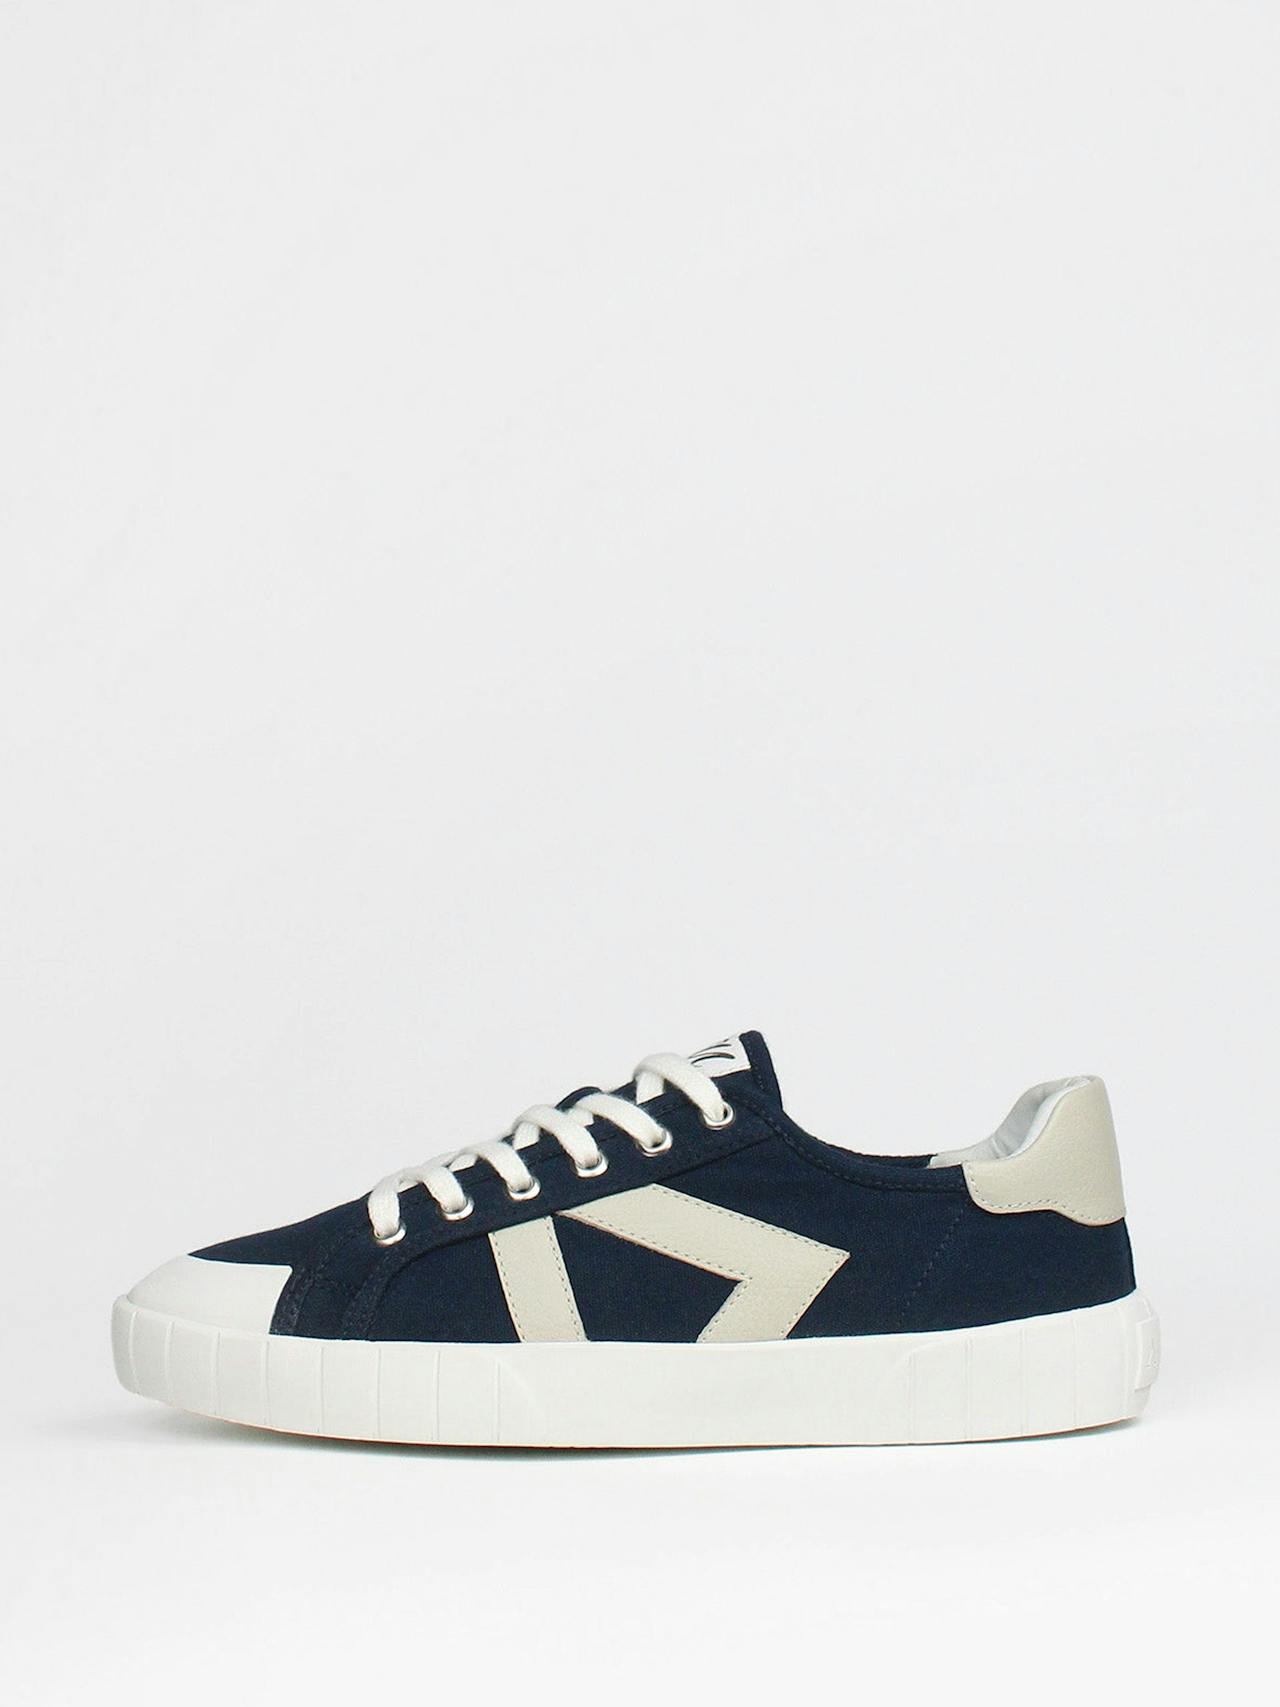 The Helios navy and beige trainers